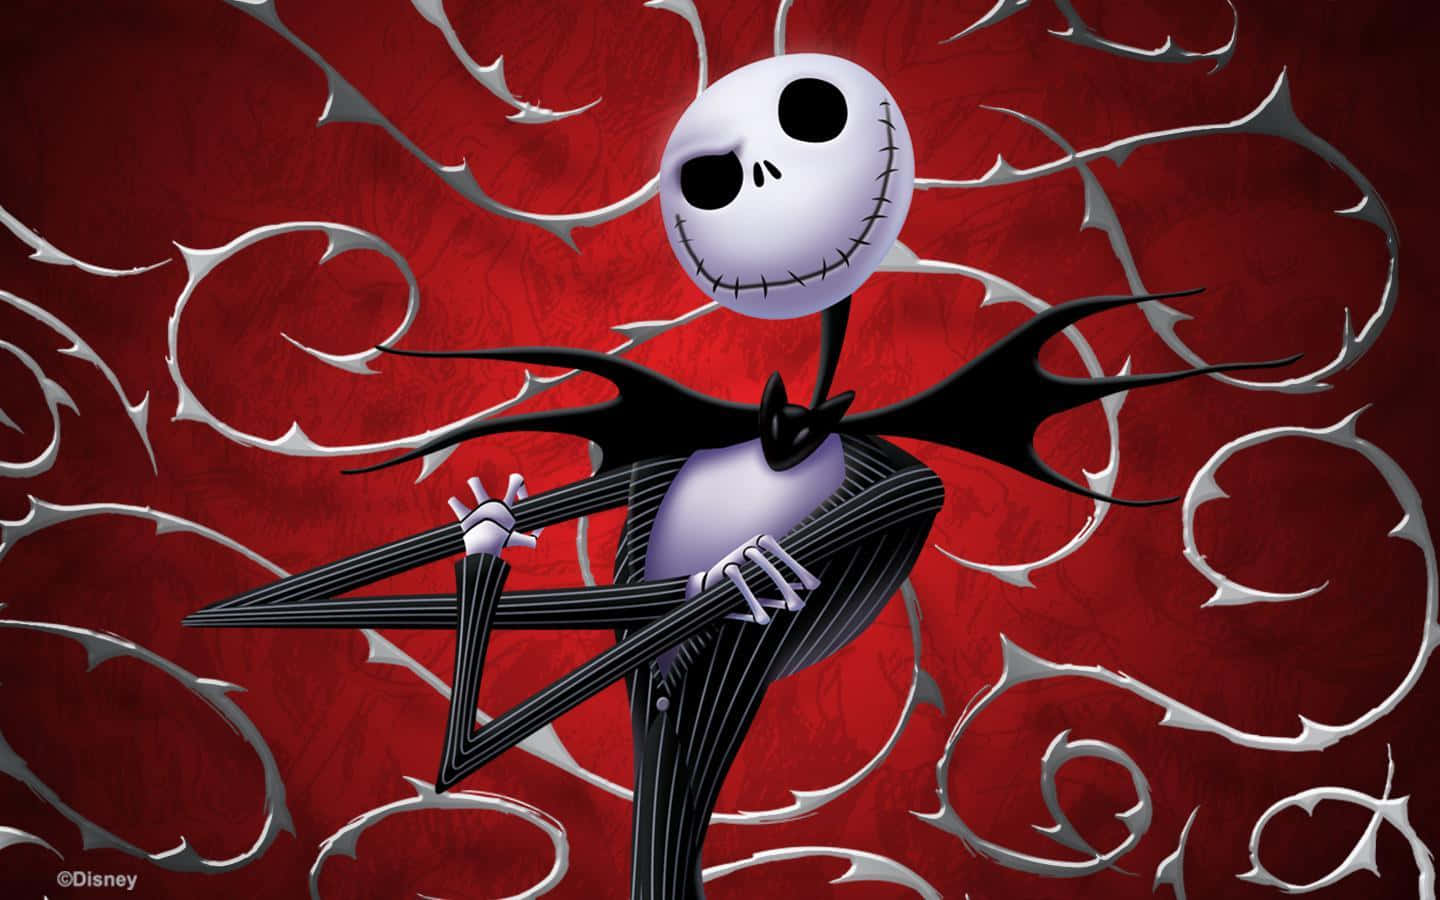 "Enjoying the spookiest holiday with The Nightmare Before Christmas!"